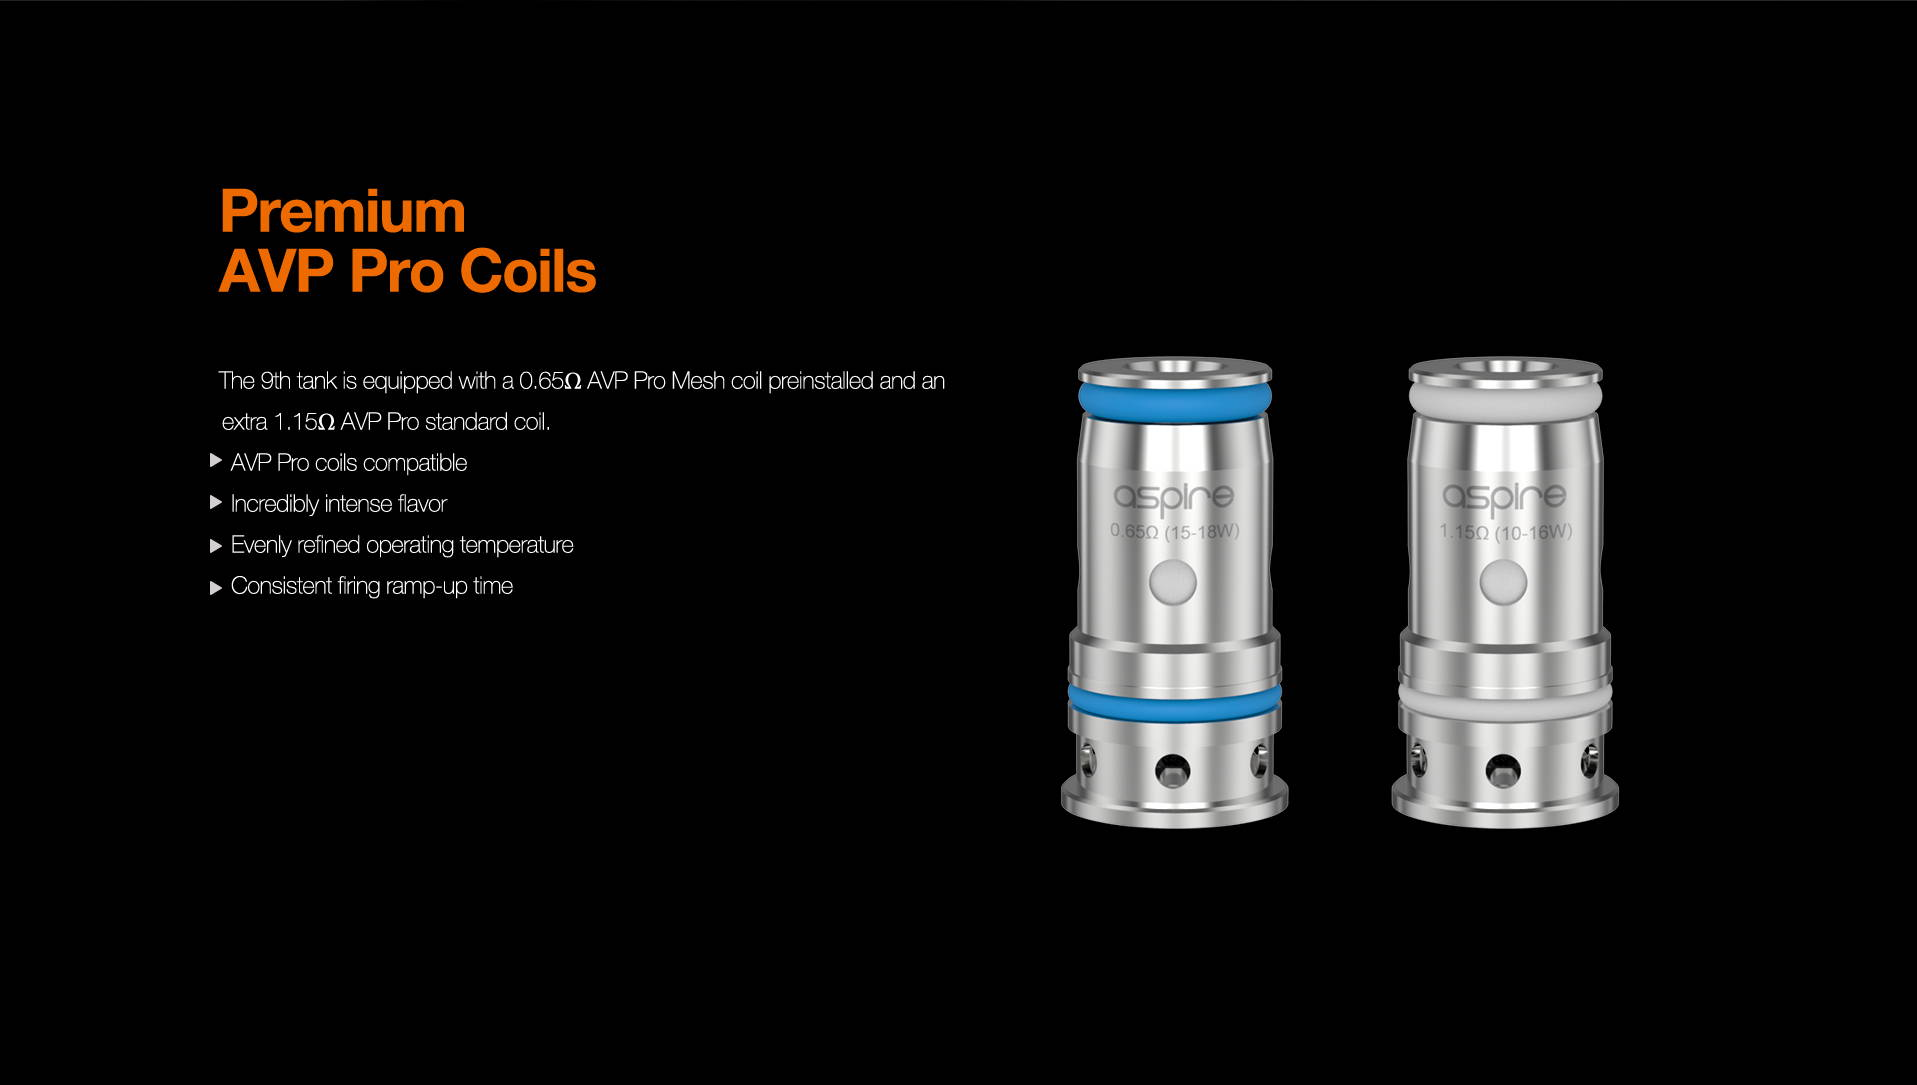 The 9th tank is equipped with a 0.65 ohm AVP Pro mesh coil preinstalled and an extra 1.15ohm AVP Pro coil also.